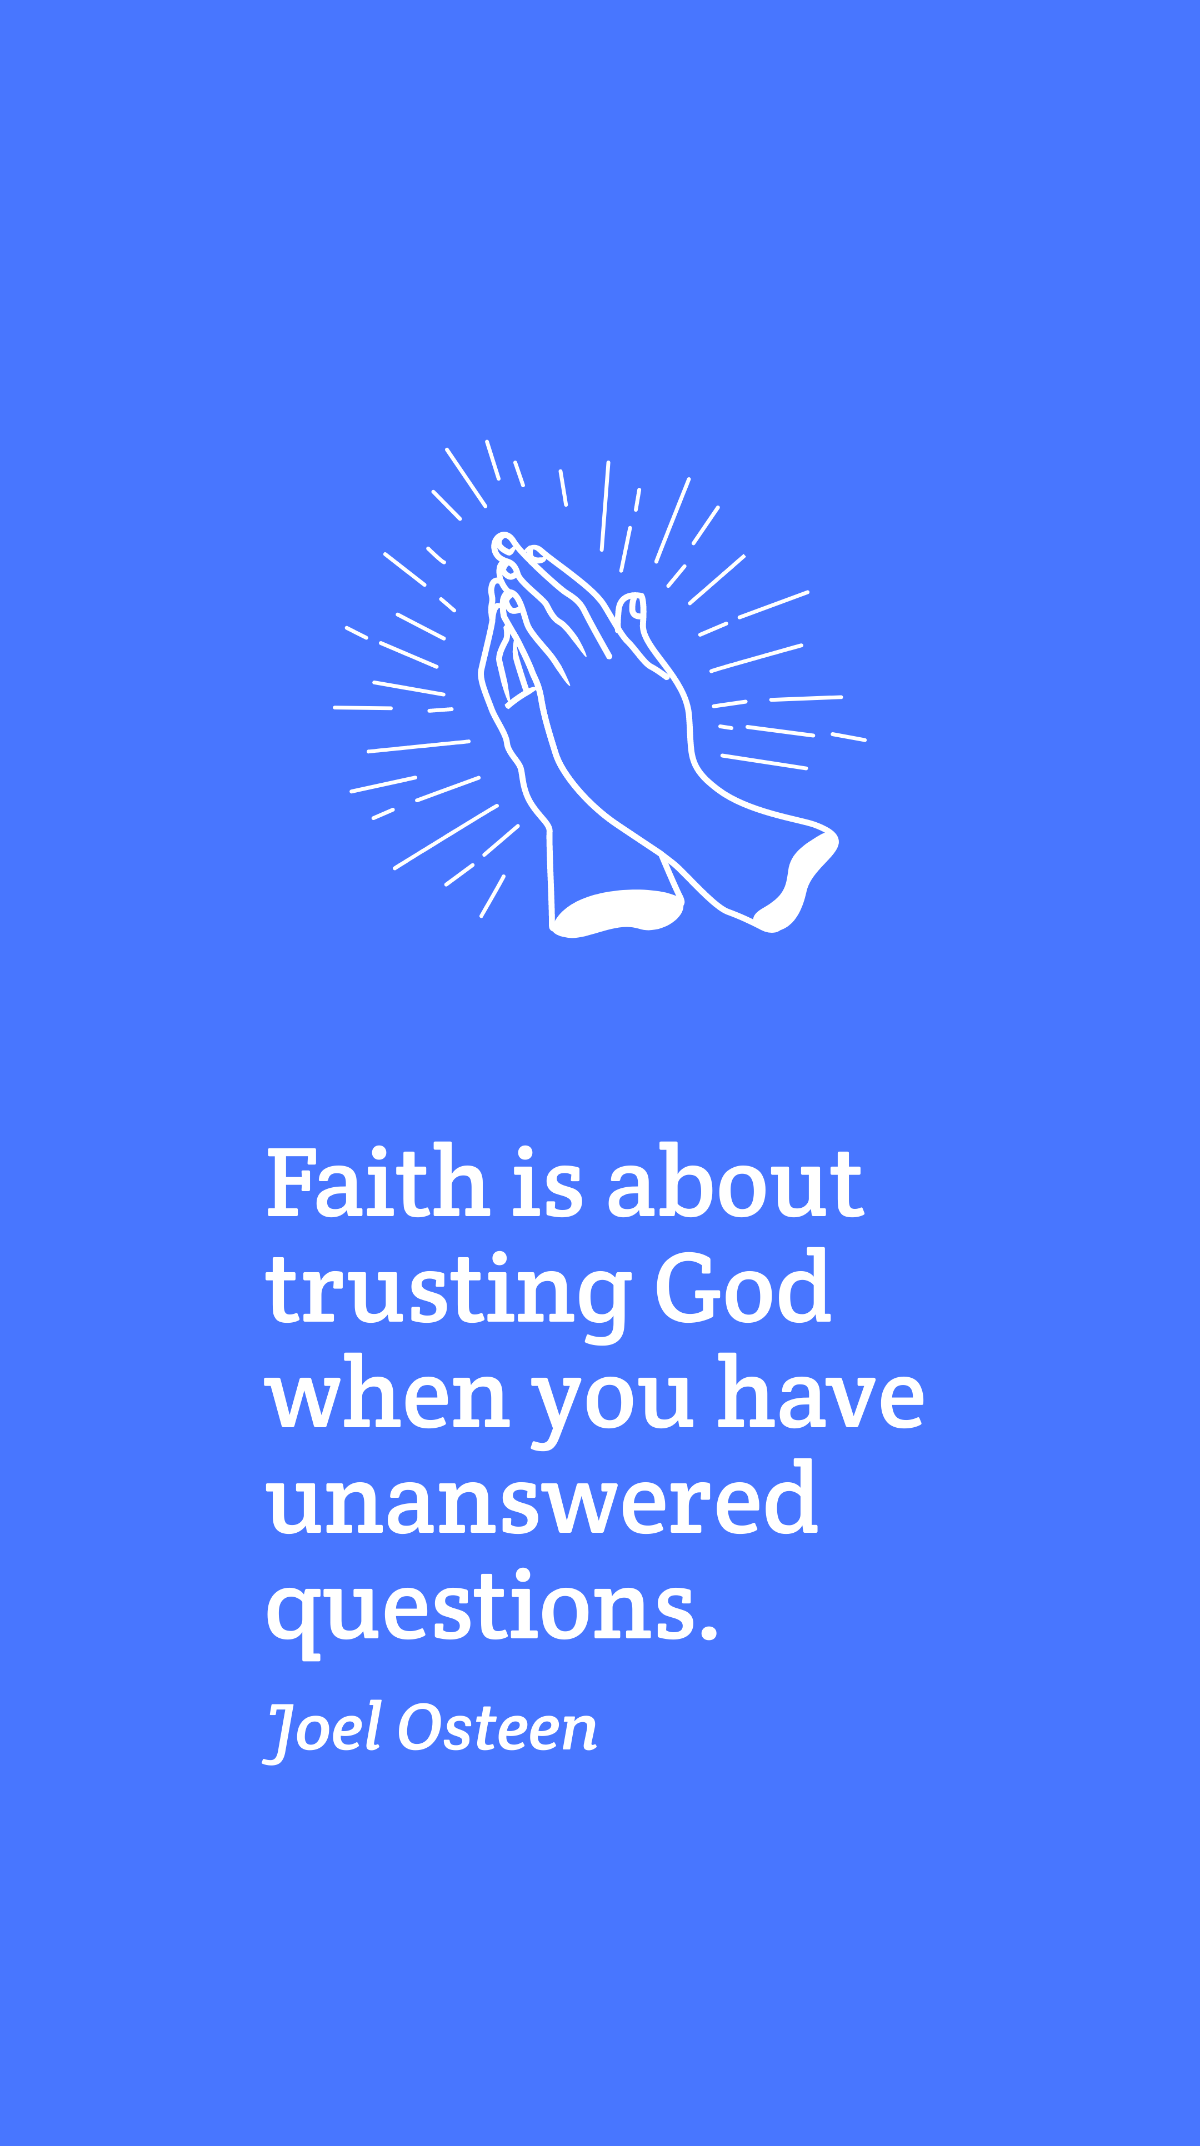 Joel Osteen - Faith is about trusting God when you have unanswered questions. Template